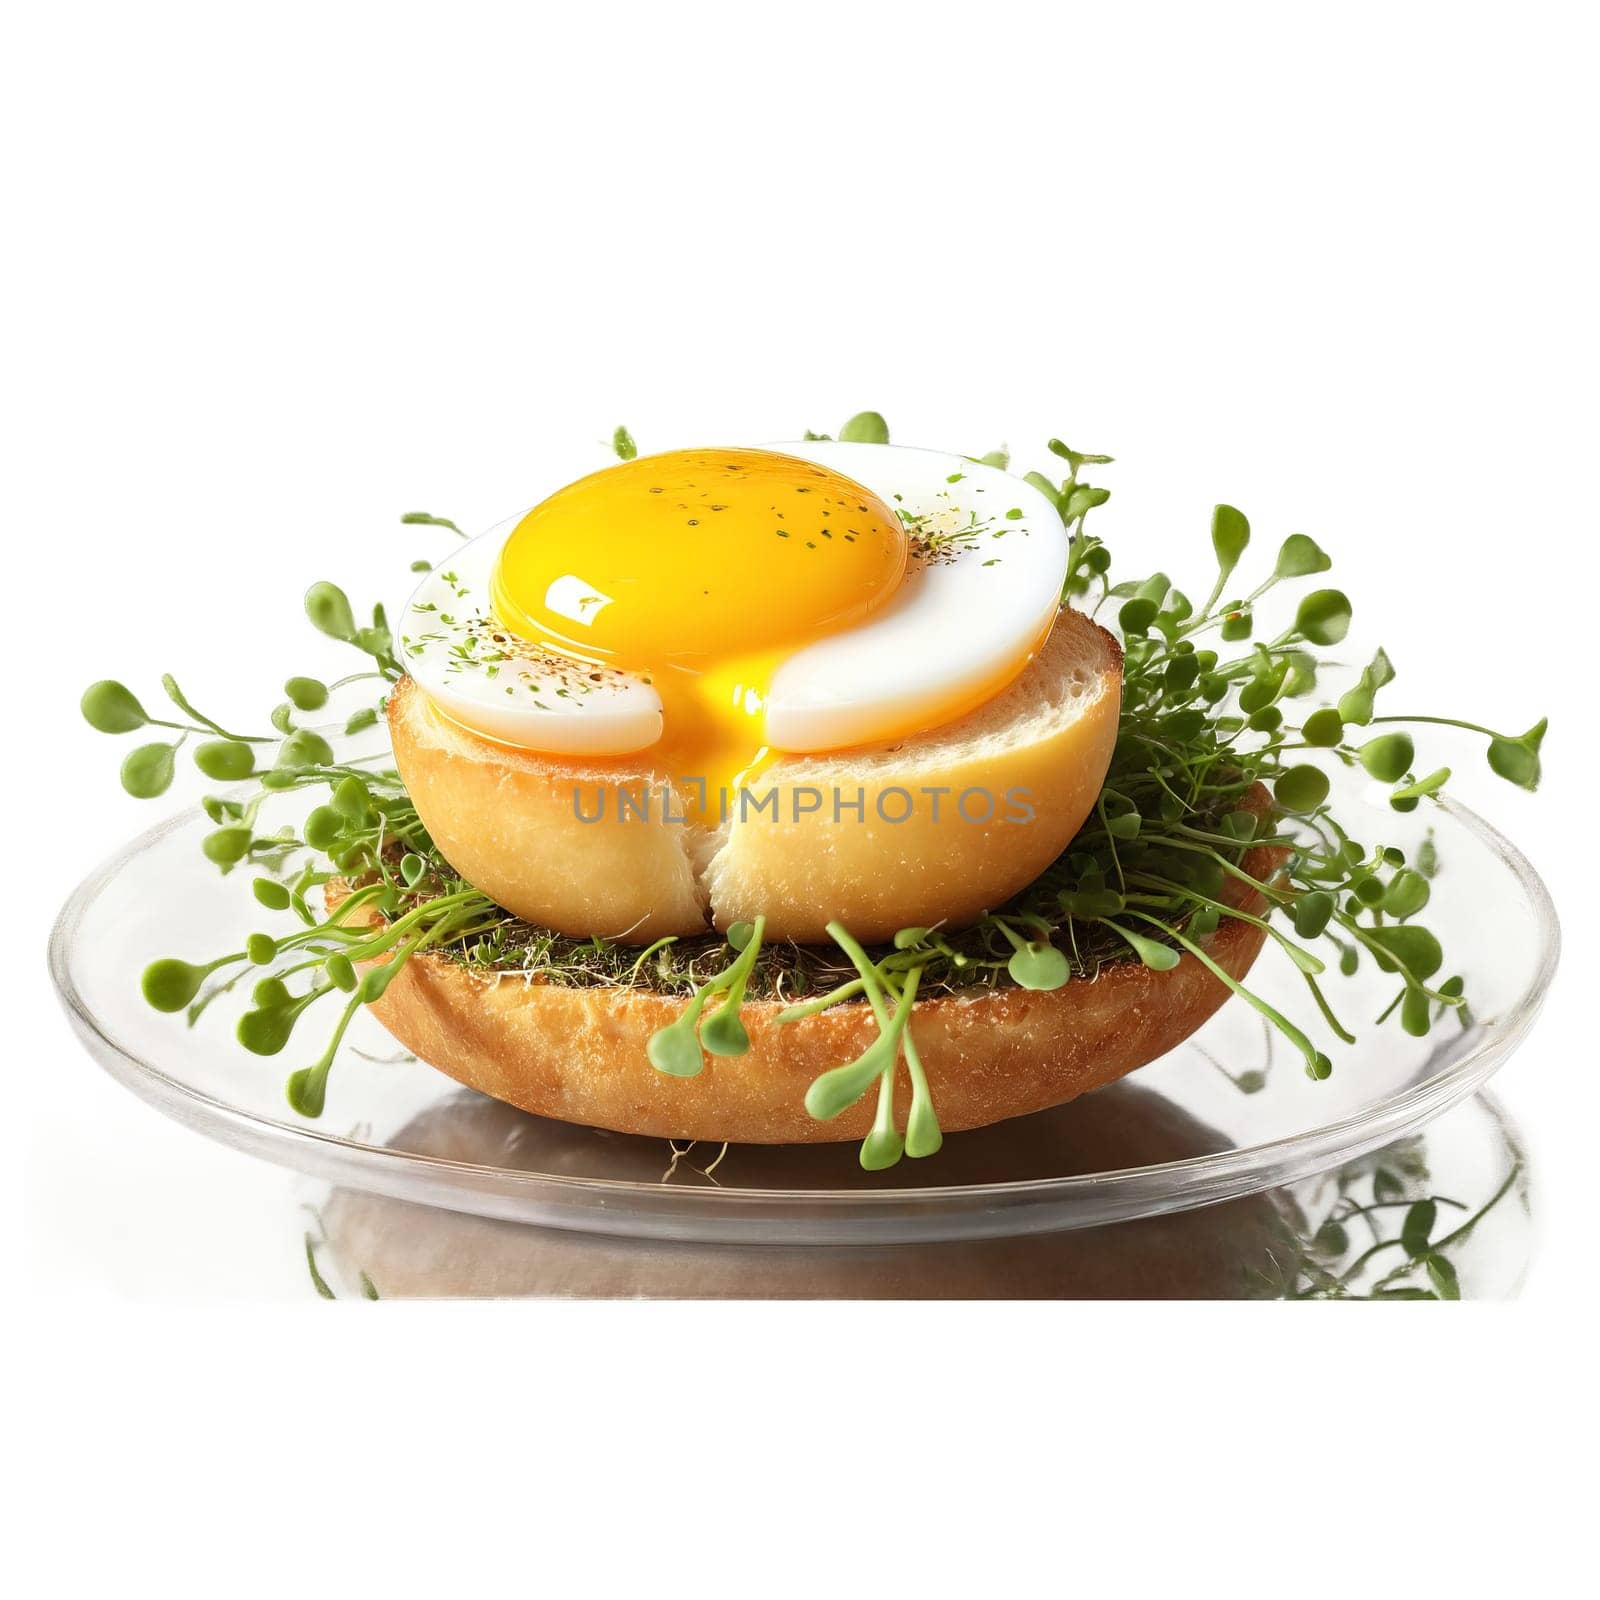 Quail egg toast golden yolk quivering on brioche round in glass dish micro greens isolated. Food isolated on transparent background.